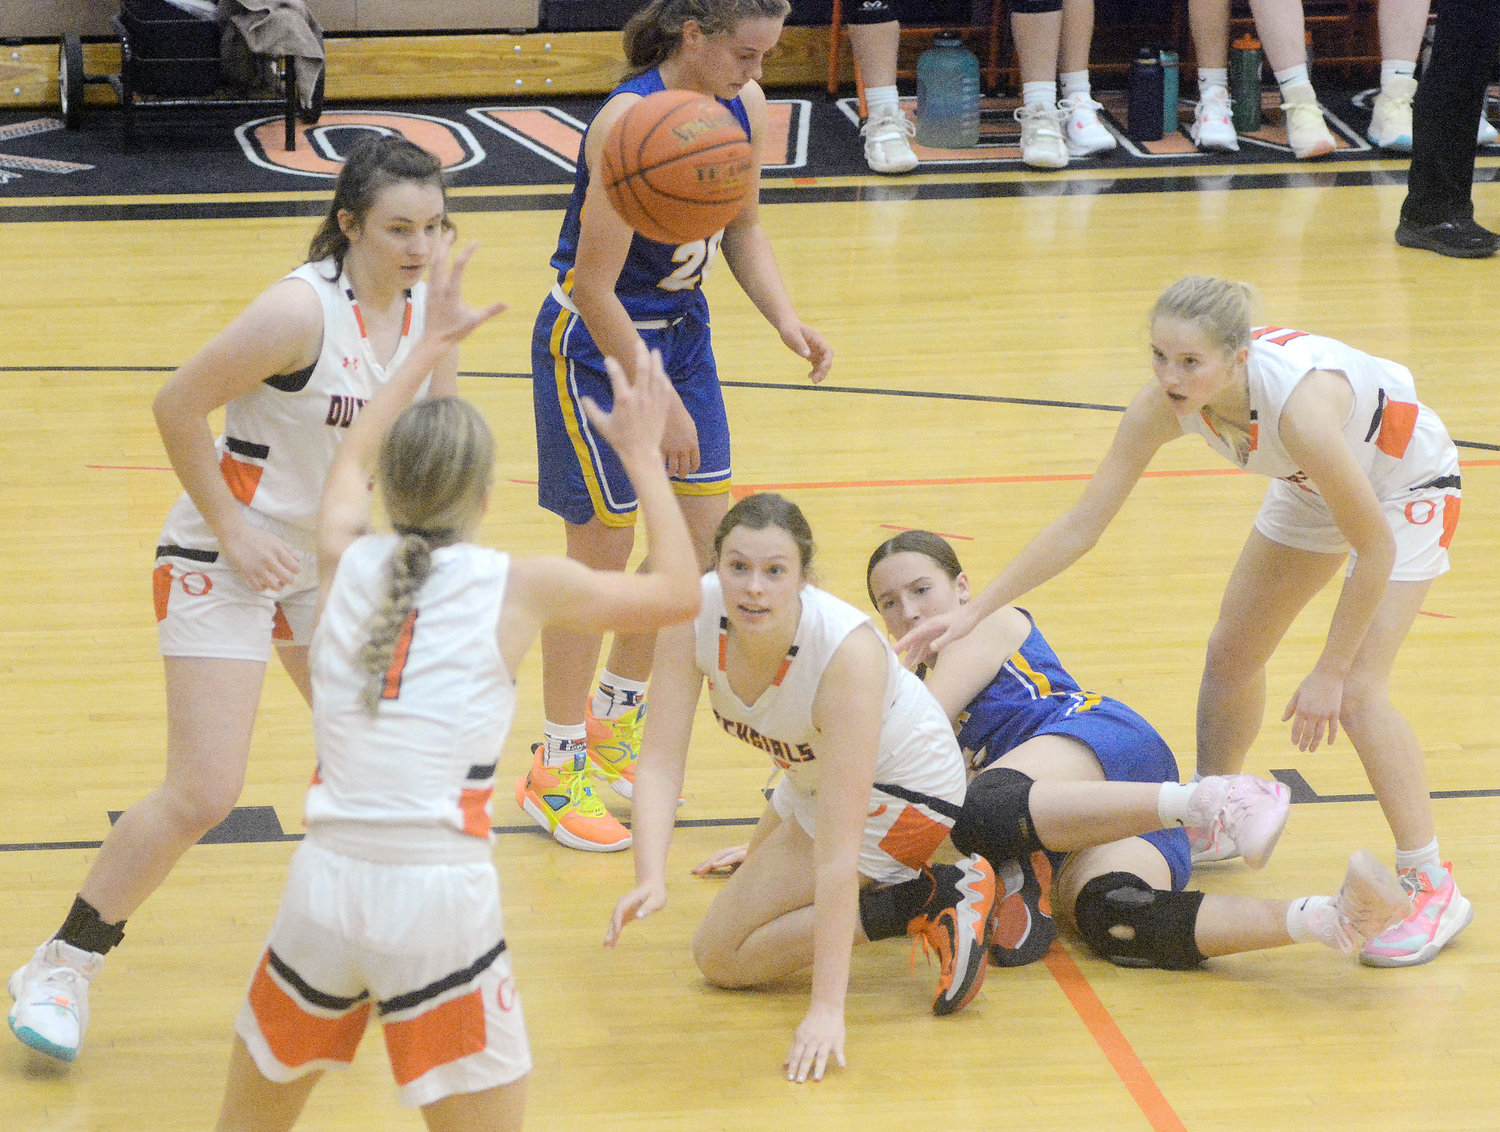 Kiana Guerrero (center) watches the ball sail into the waiting hands of Emma Daniels after she stole late in Owensville’s 63-32 season-opening girls basketball victory Monday night over the visiting St. Francis Borgia Lady Knights at Owensville High School.